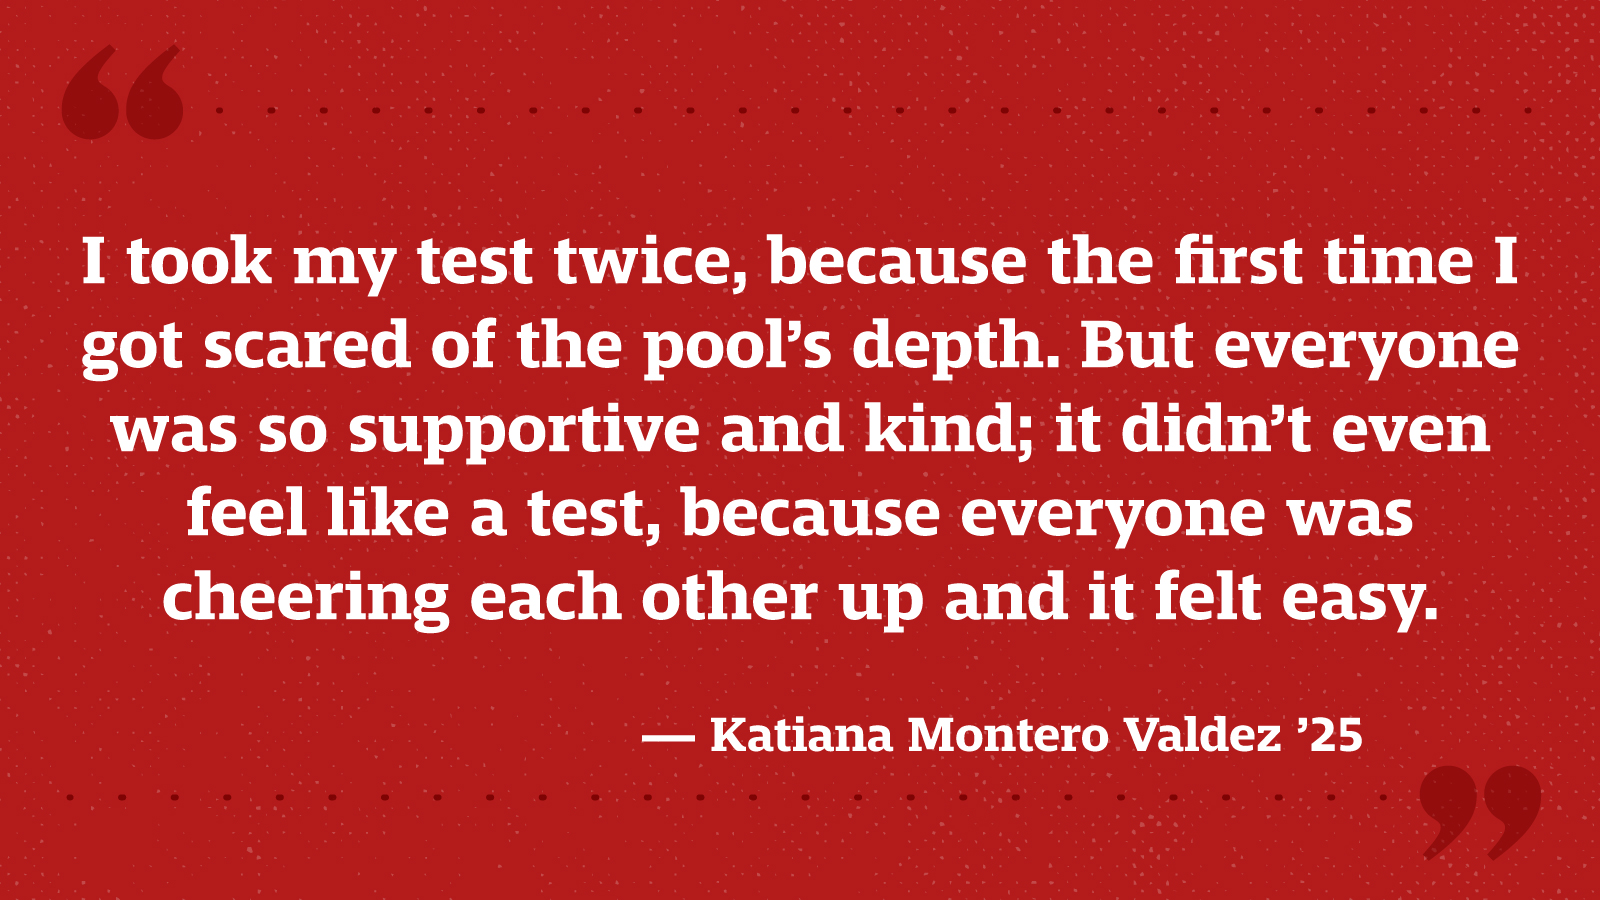 I took my test twice, because the first time I got scared of the pool’s depth. But everyone was so supportive and kind; it didn’t even feel like a test, because everyone was cheering each other up and it felt easy. — Katiana Montero Valdez ’25